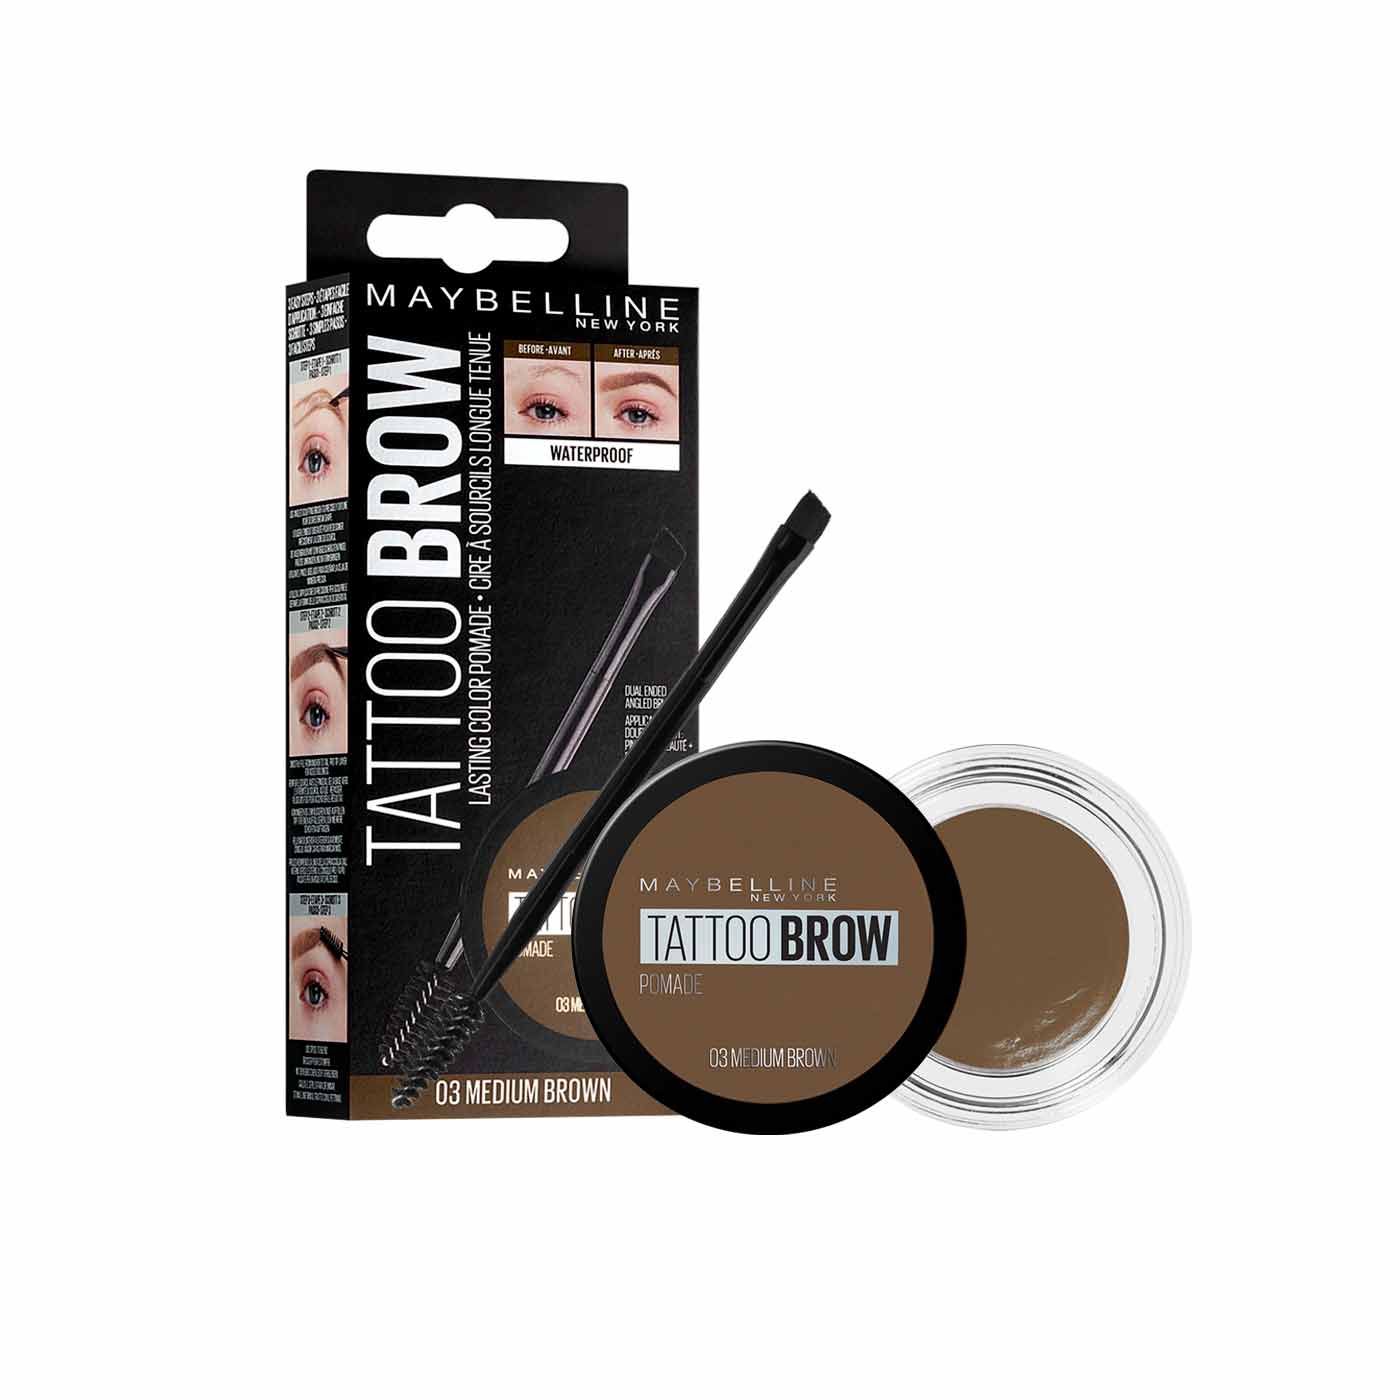 Brow New Mengotti Waterproof | Couture® Color Pomade Lasting Maybelline York, Tatto